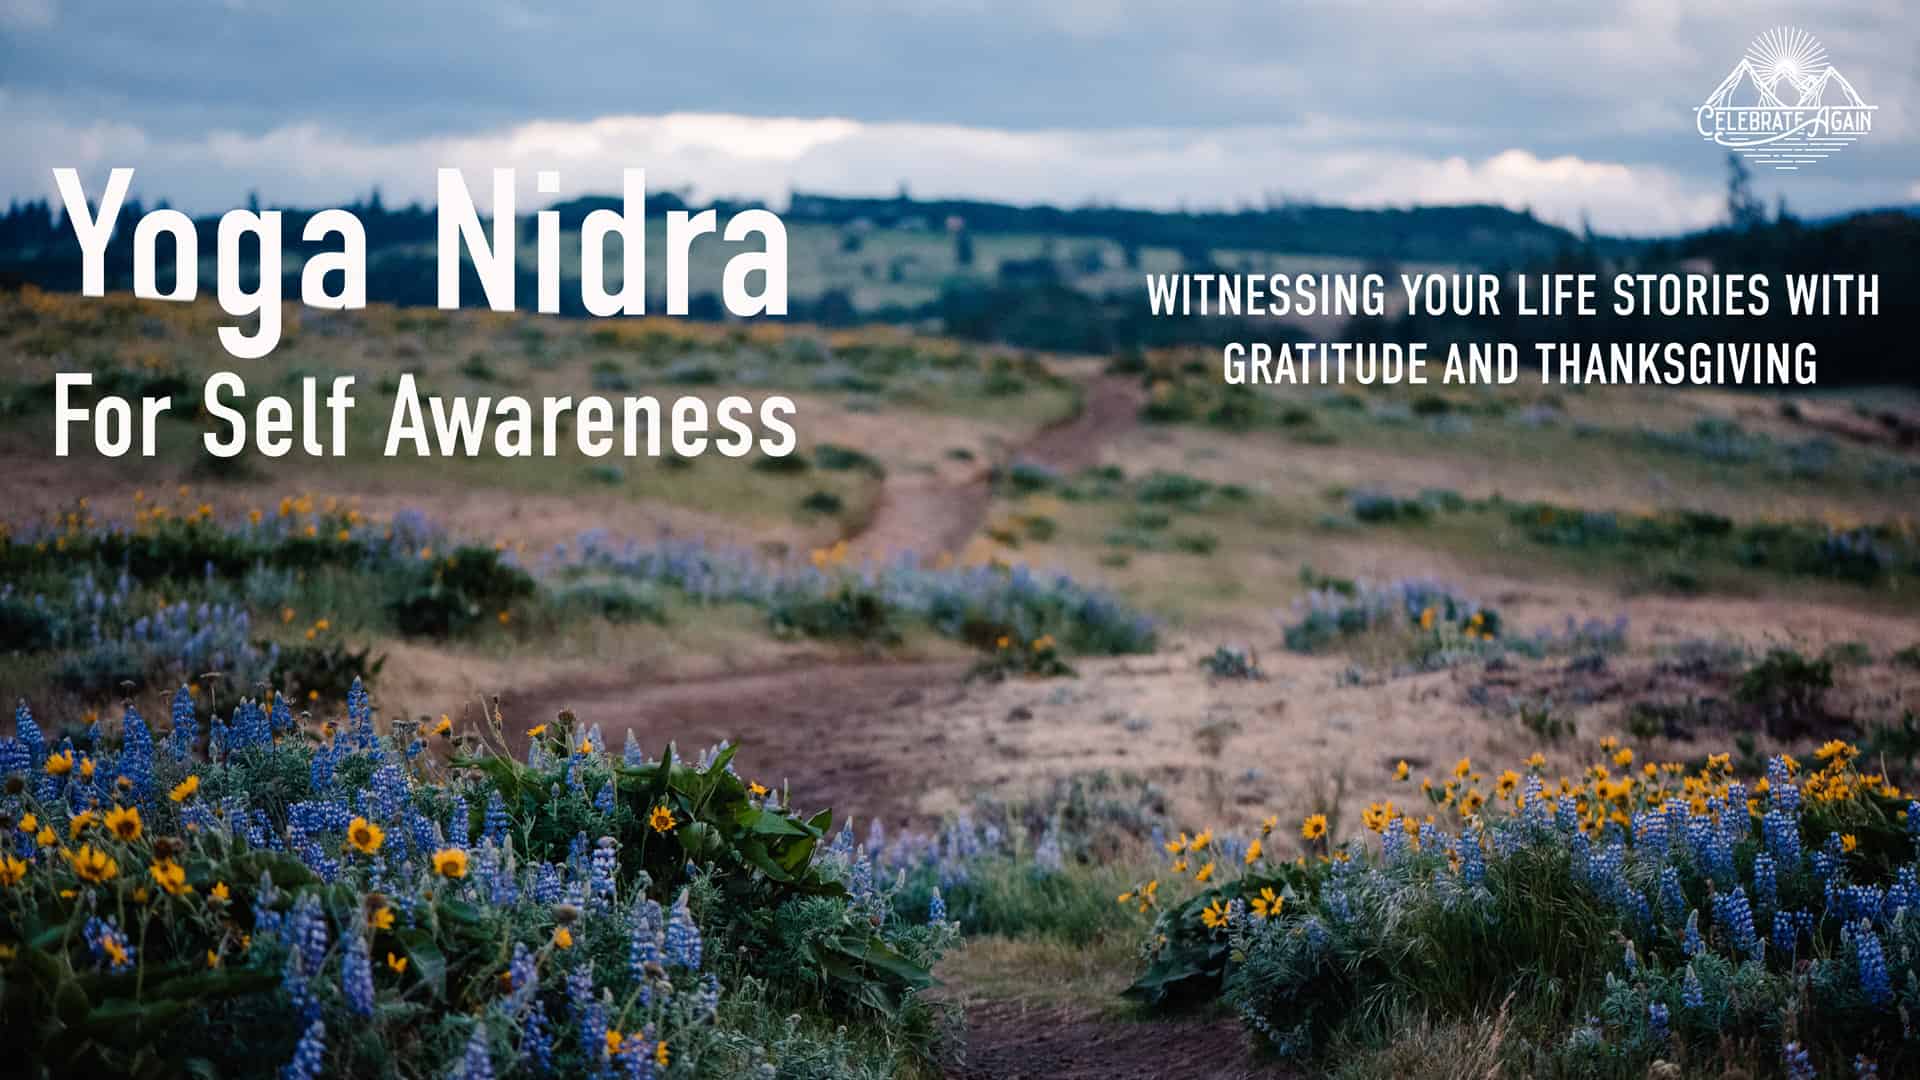 "Yoga Nidra for self awareness Witnessing your life stories with gratitude and thanksgiving" text over image of wild flowers on a trail that leads to tall trees ahead